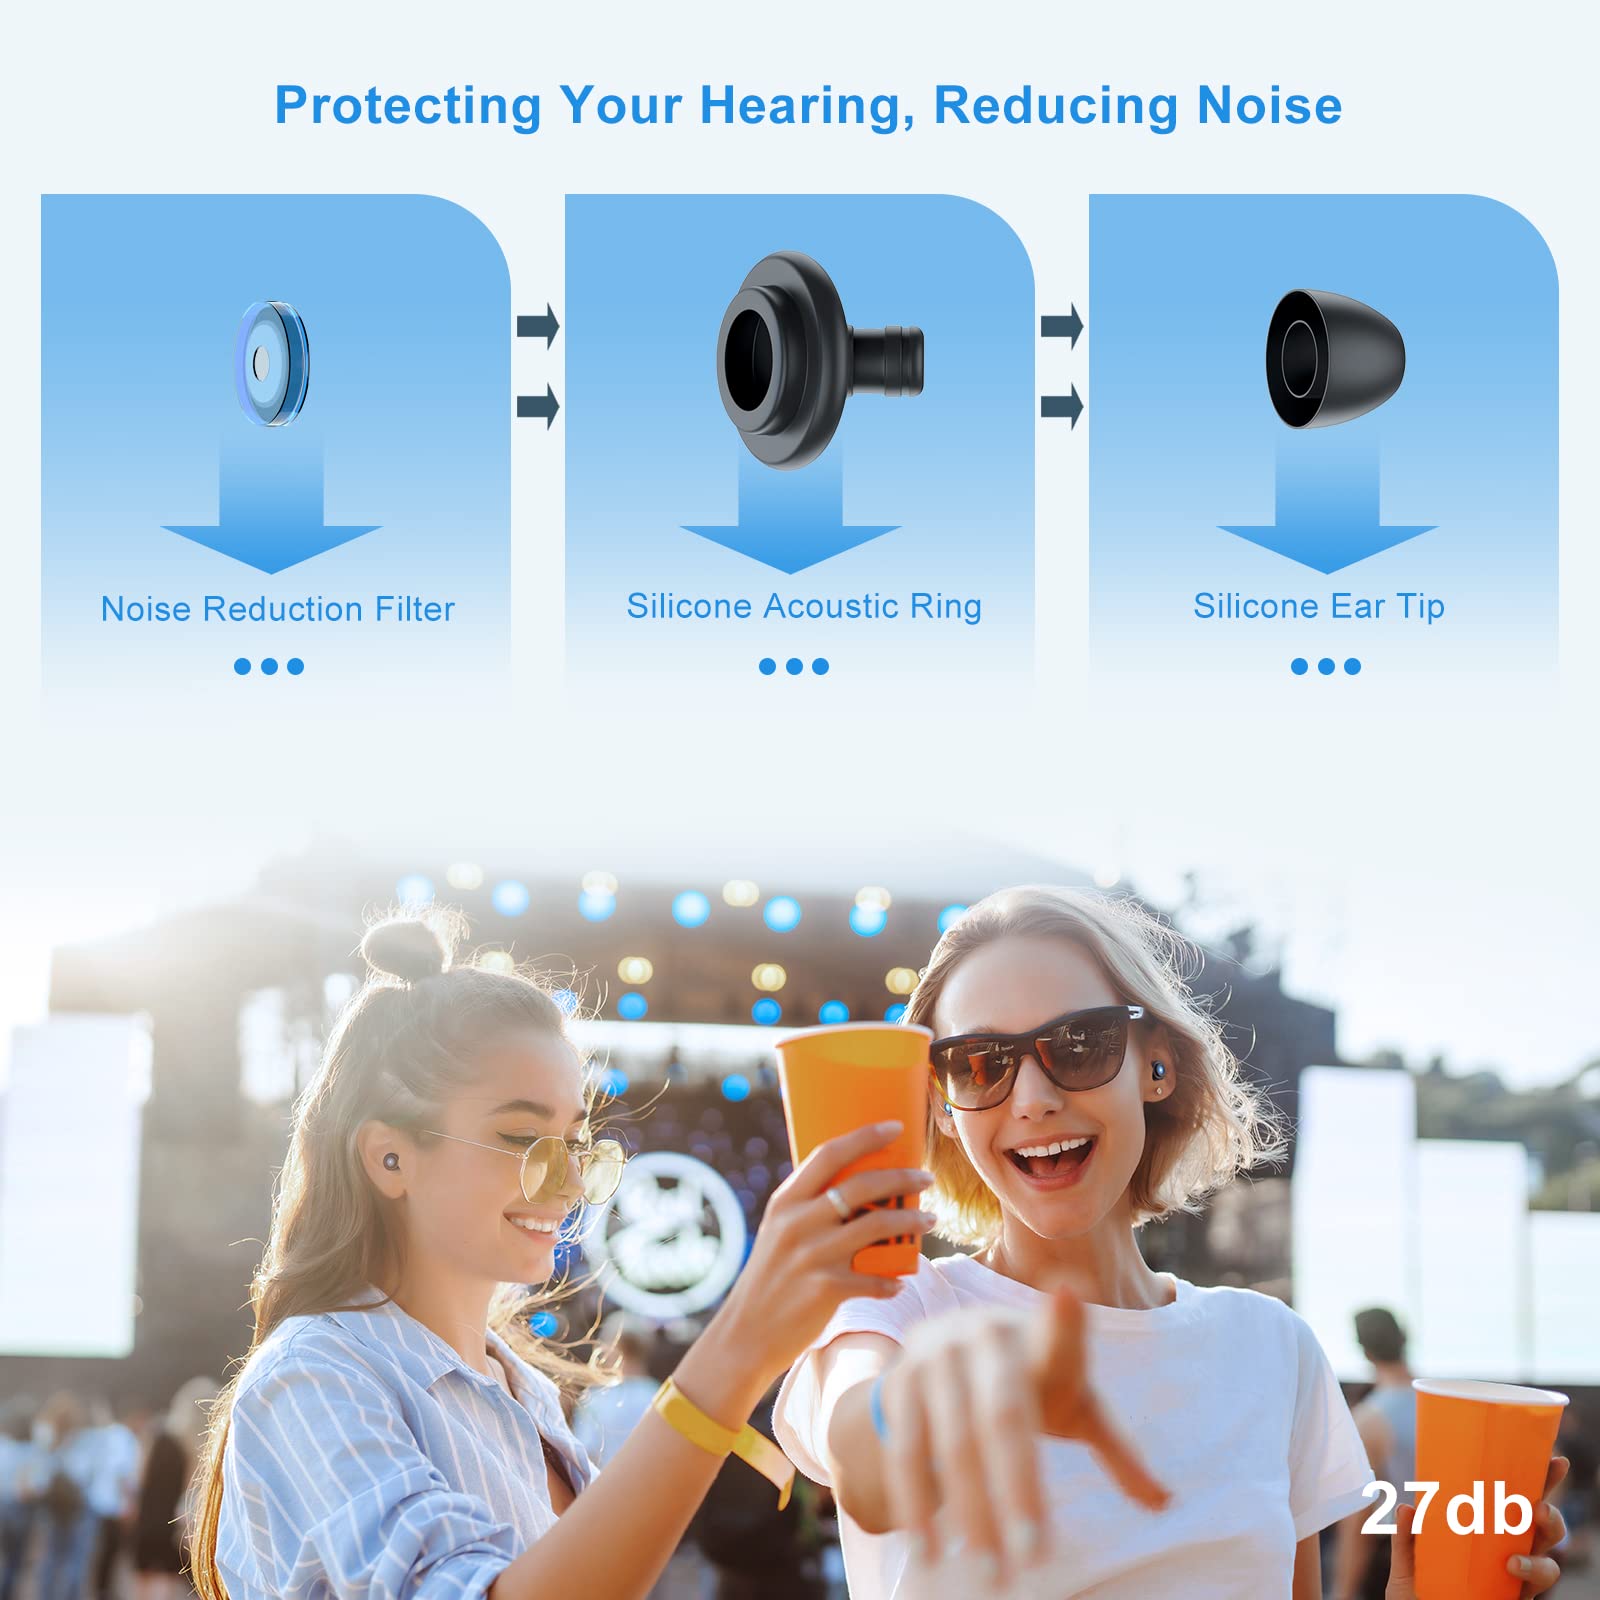 Ear Plugs for Sleeping Noise Cancelling - Soft Silicone Reusable Earplugs Hearing Protection Noise Reduction Ear Plugs for Sleep, Snoring, Concerts, Studying, Noise Sensitivity & Flights - 27dB